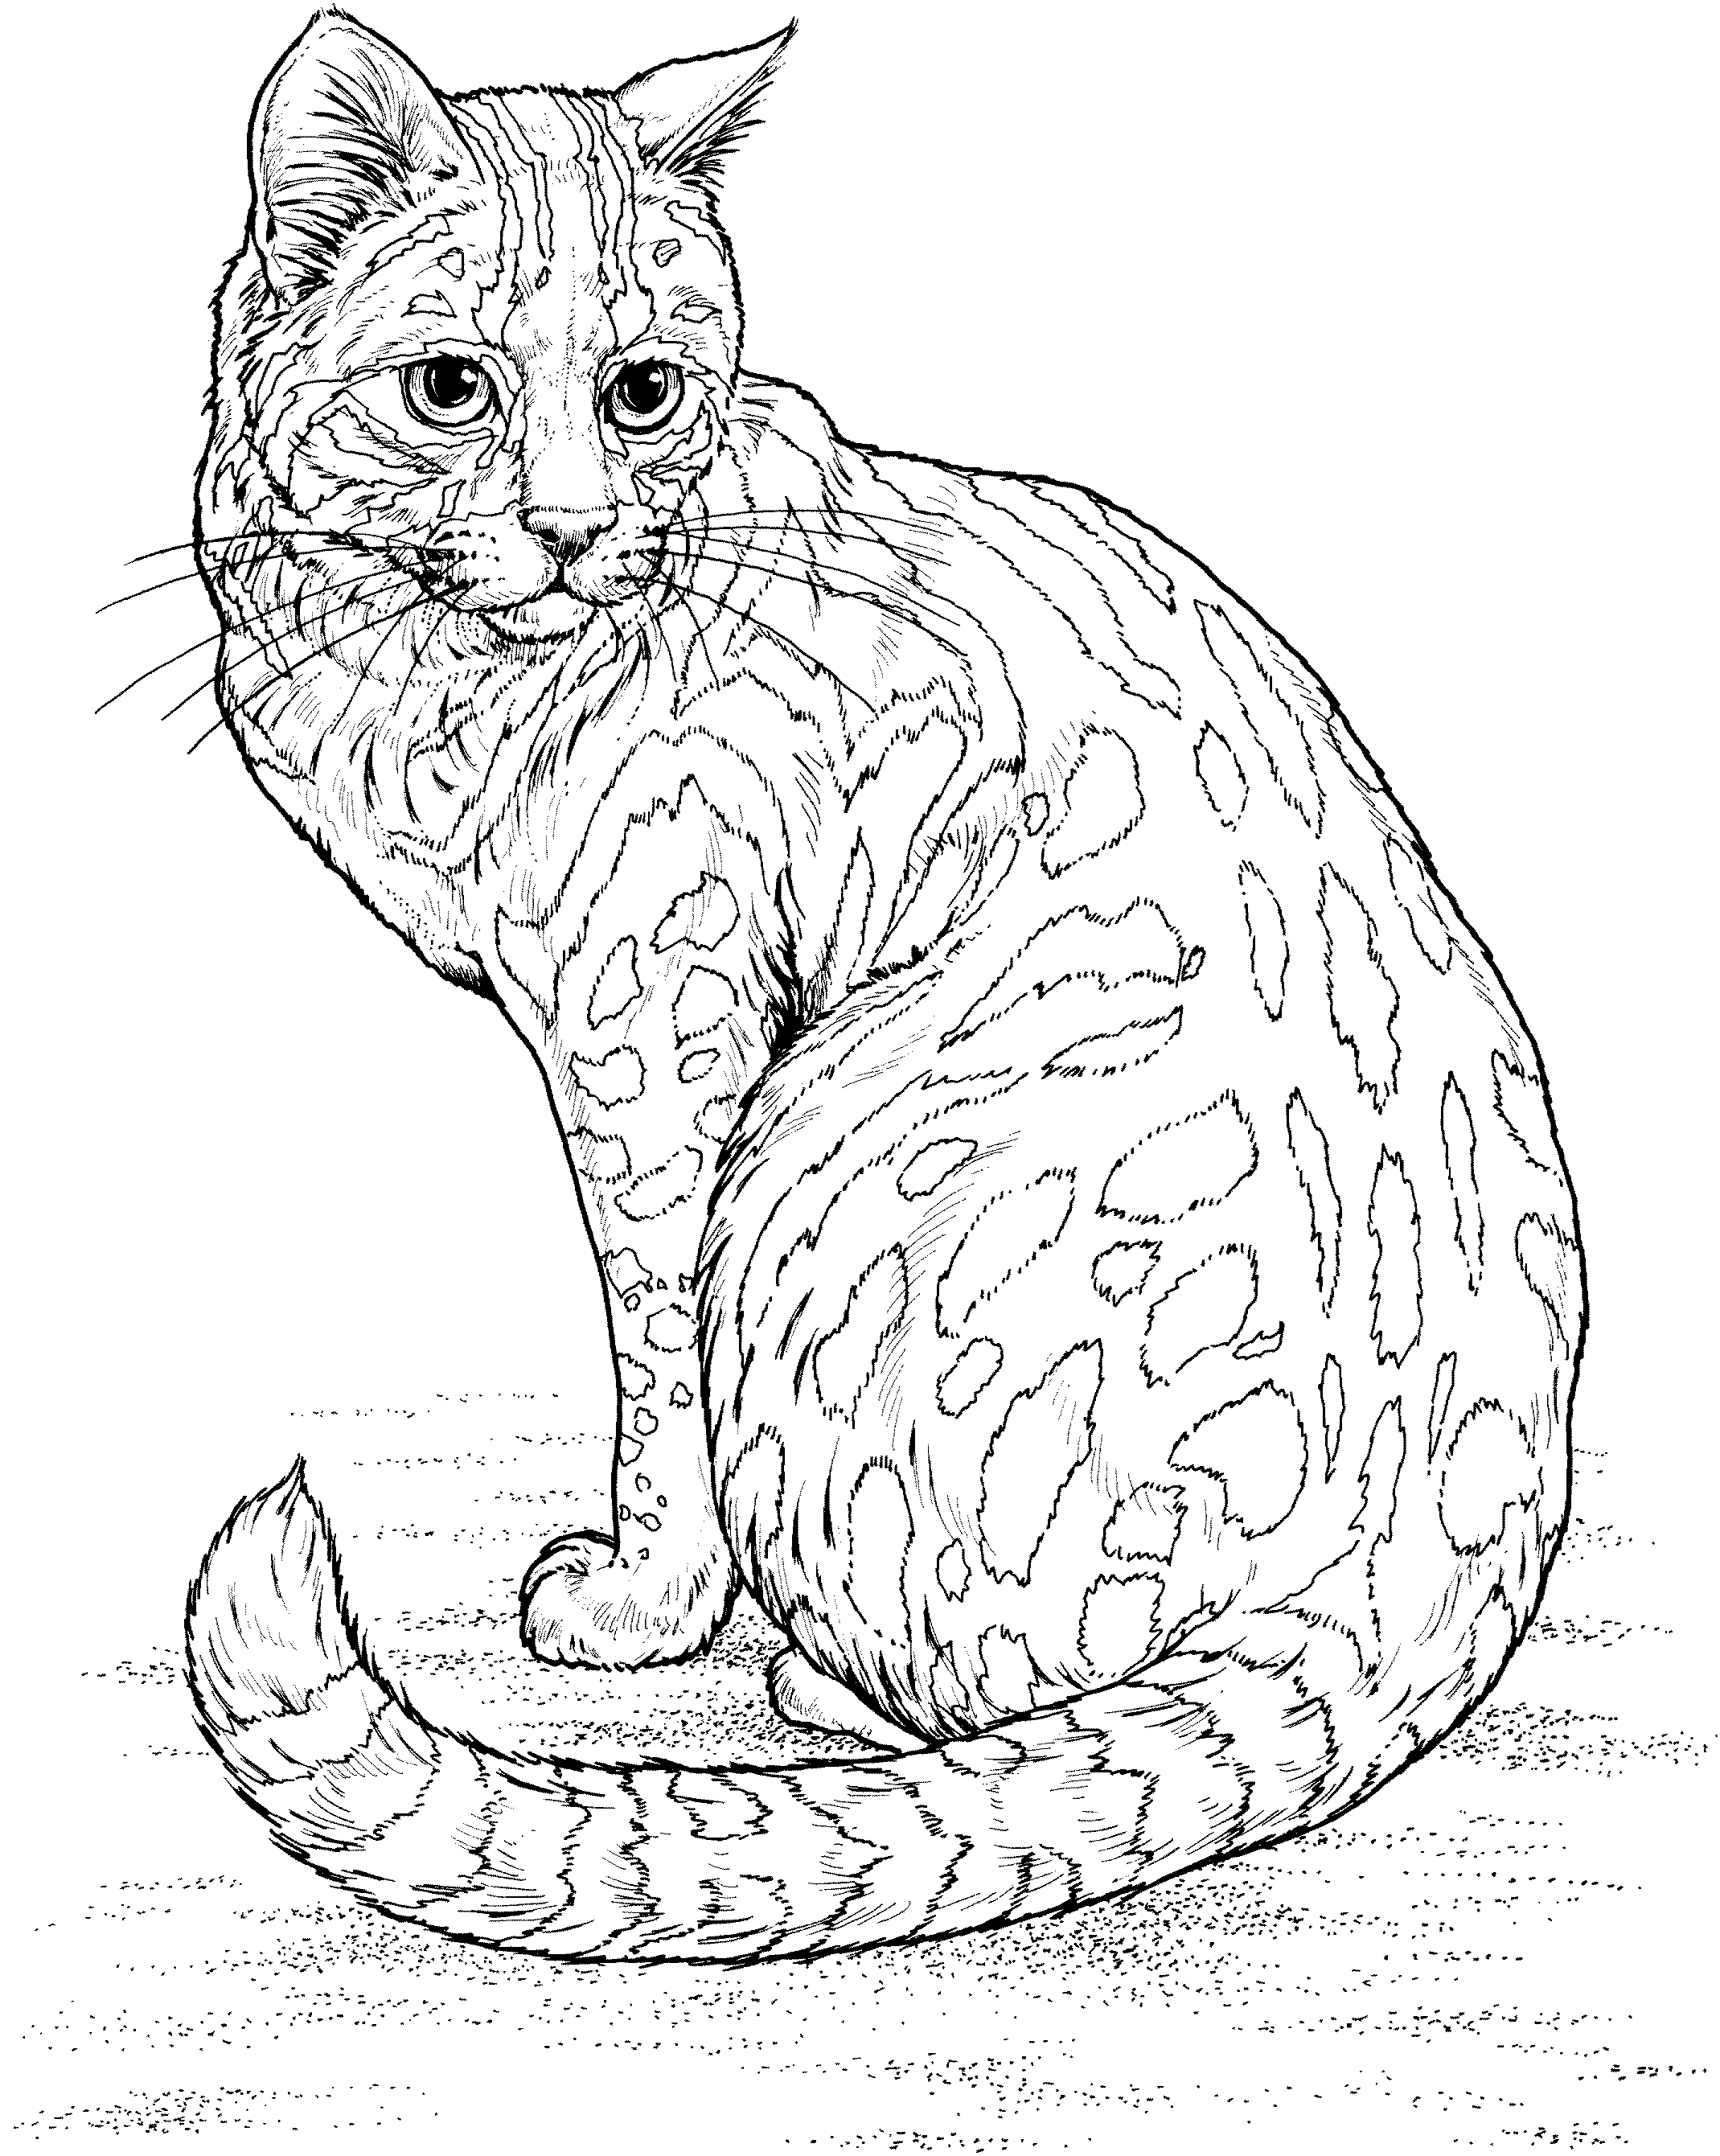 leopard pictures to color leopard 5 coloring page free printable coloring pages leopard pictures color to 